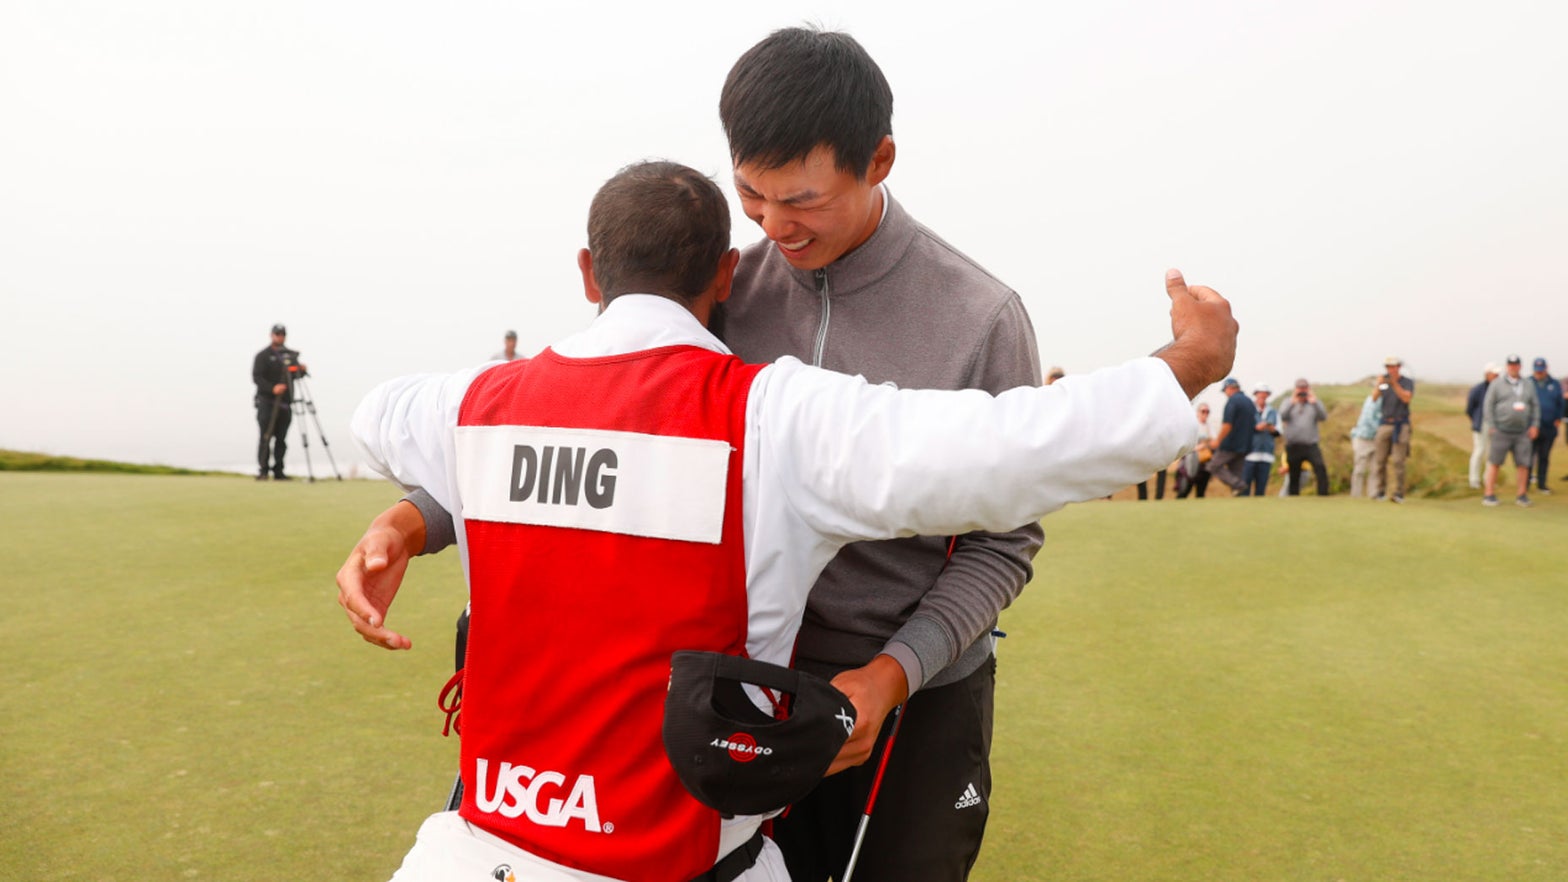 For U.S. Junior Amateur champ Wenyi Ding, the sky appears to be the limit